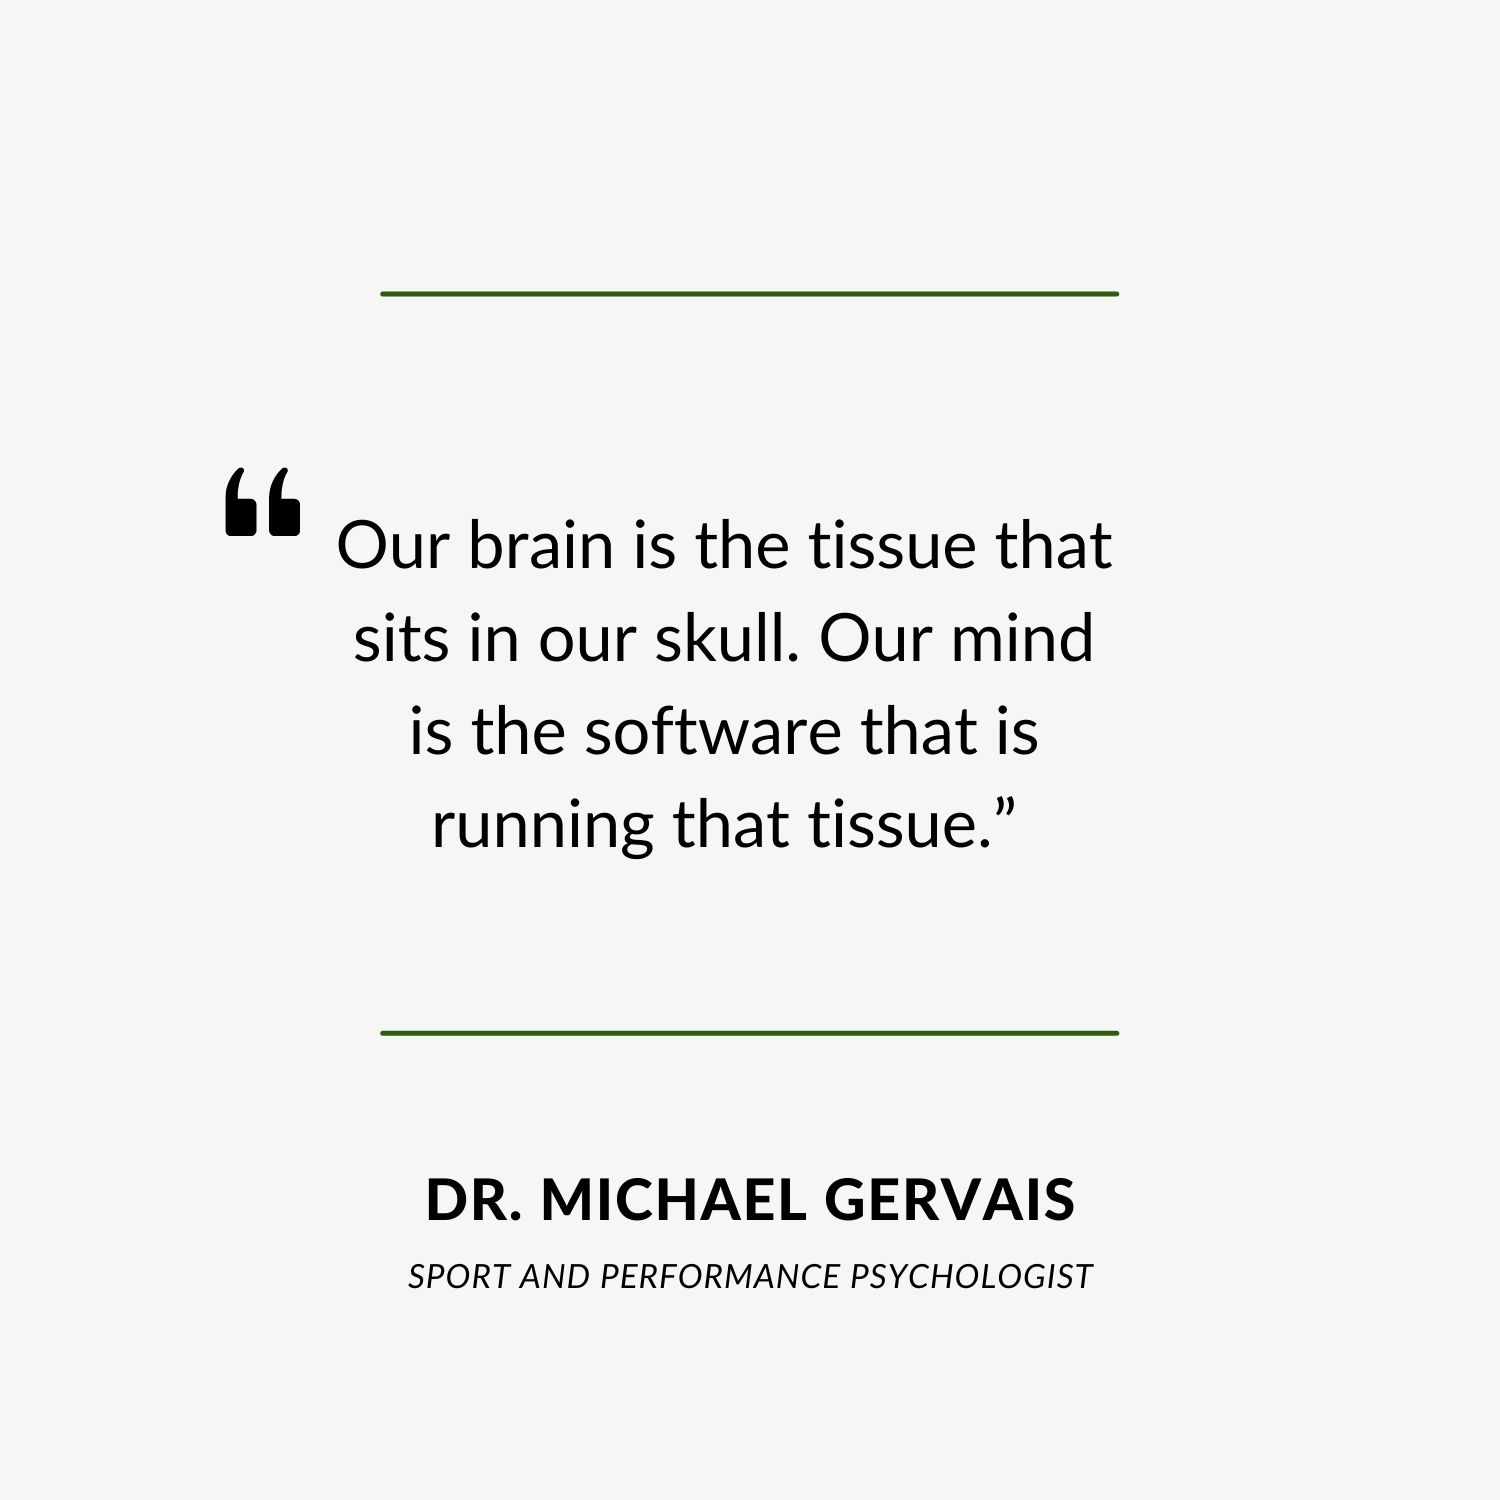 Quote from podcast episode - “Our brain is the tissue that sits in our skull. Our mind is the software that is running that tissue.”